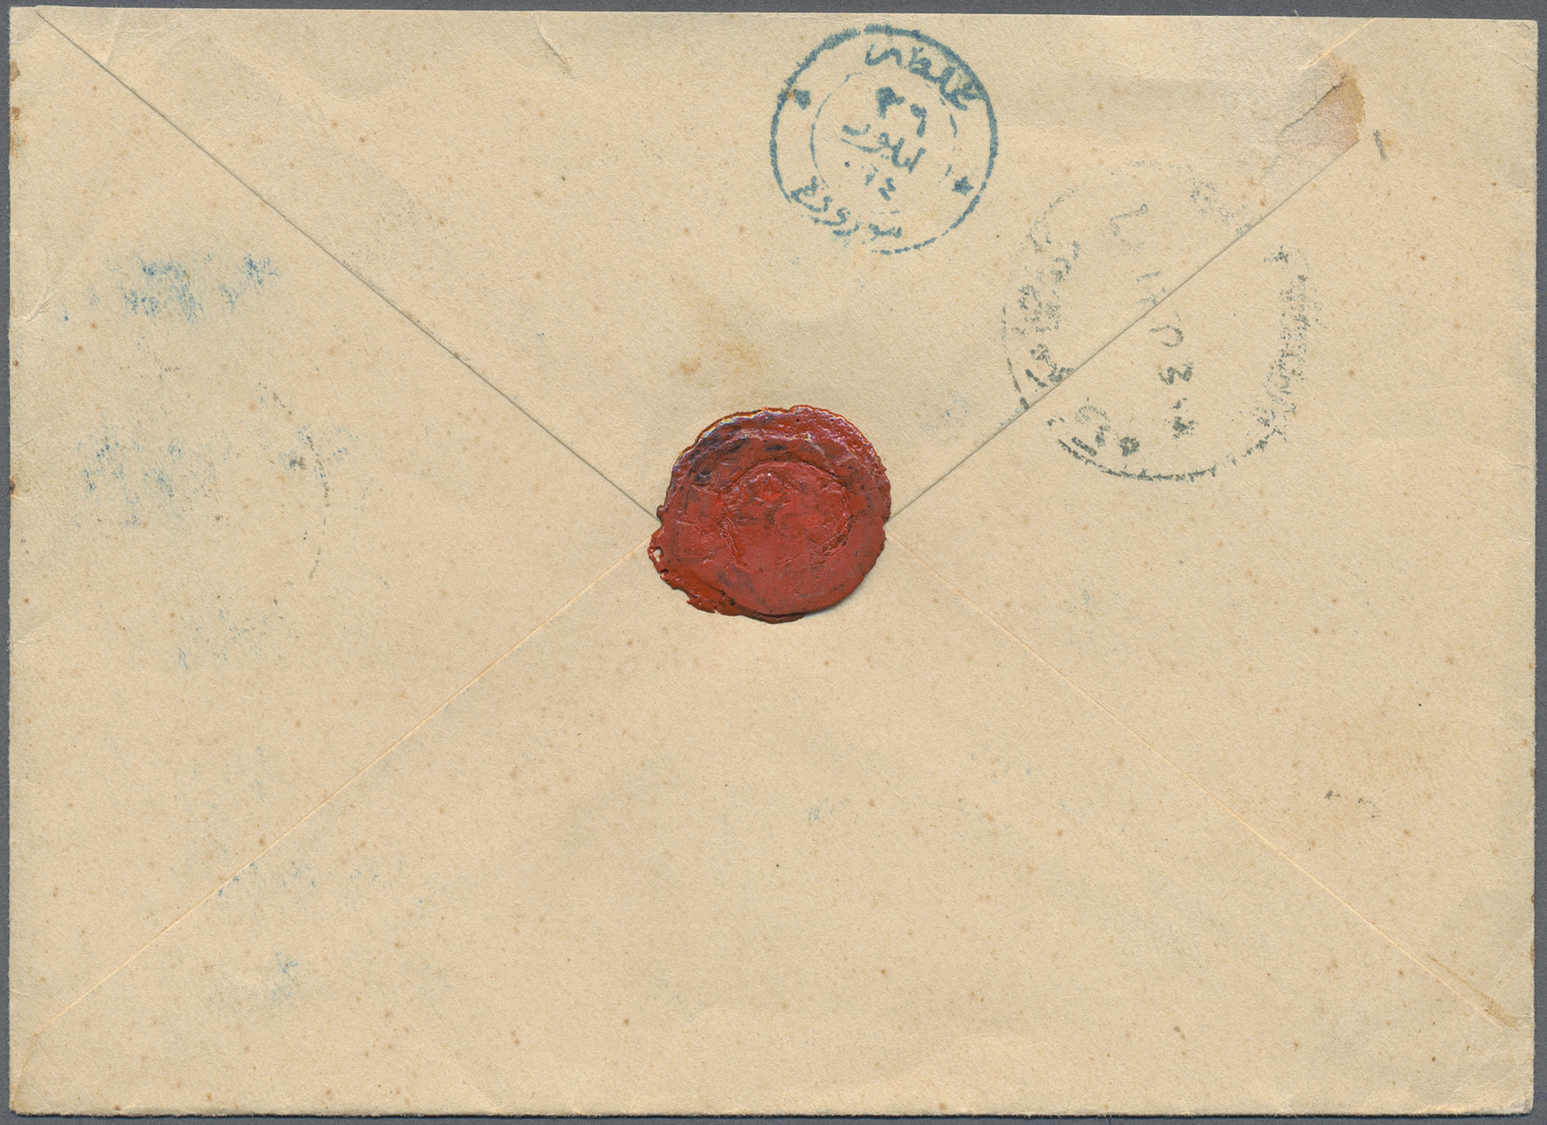 Br Syrien: 1898 Sep. 30, "Alep" Cds. With Stars Tying 2 Piasters Ochre Ottoman To Istanbul - Turkey Arrival And Wax Seal - Syria